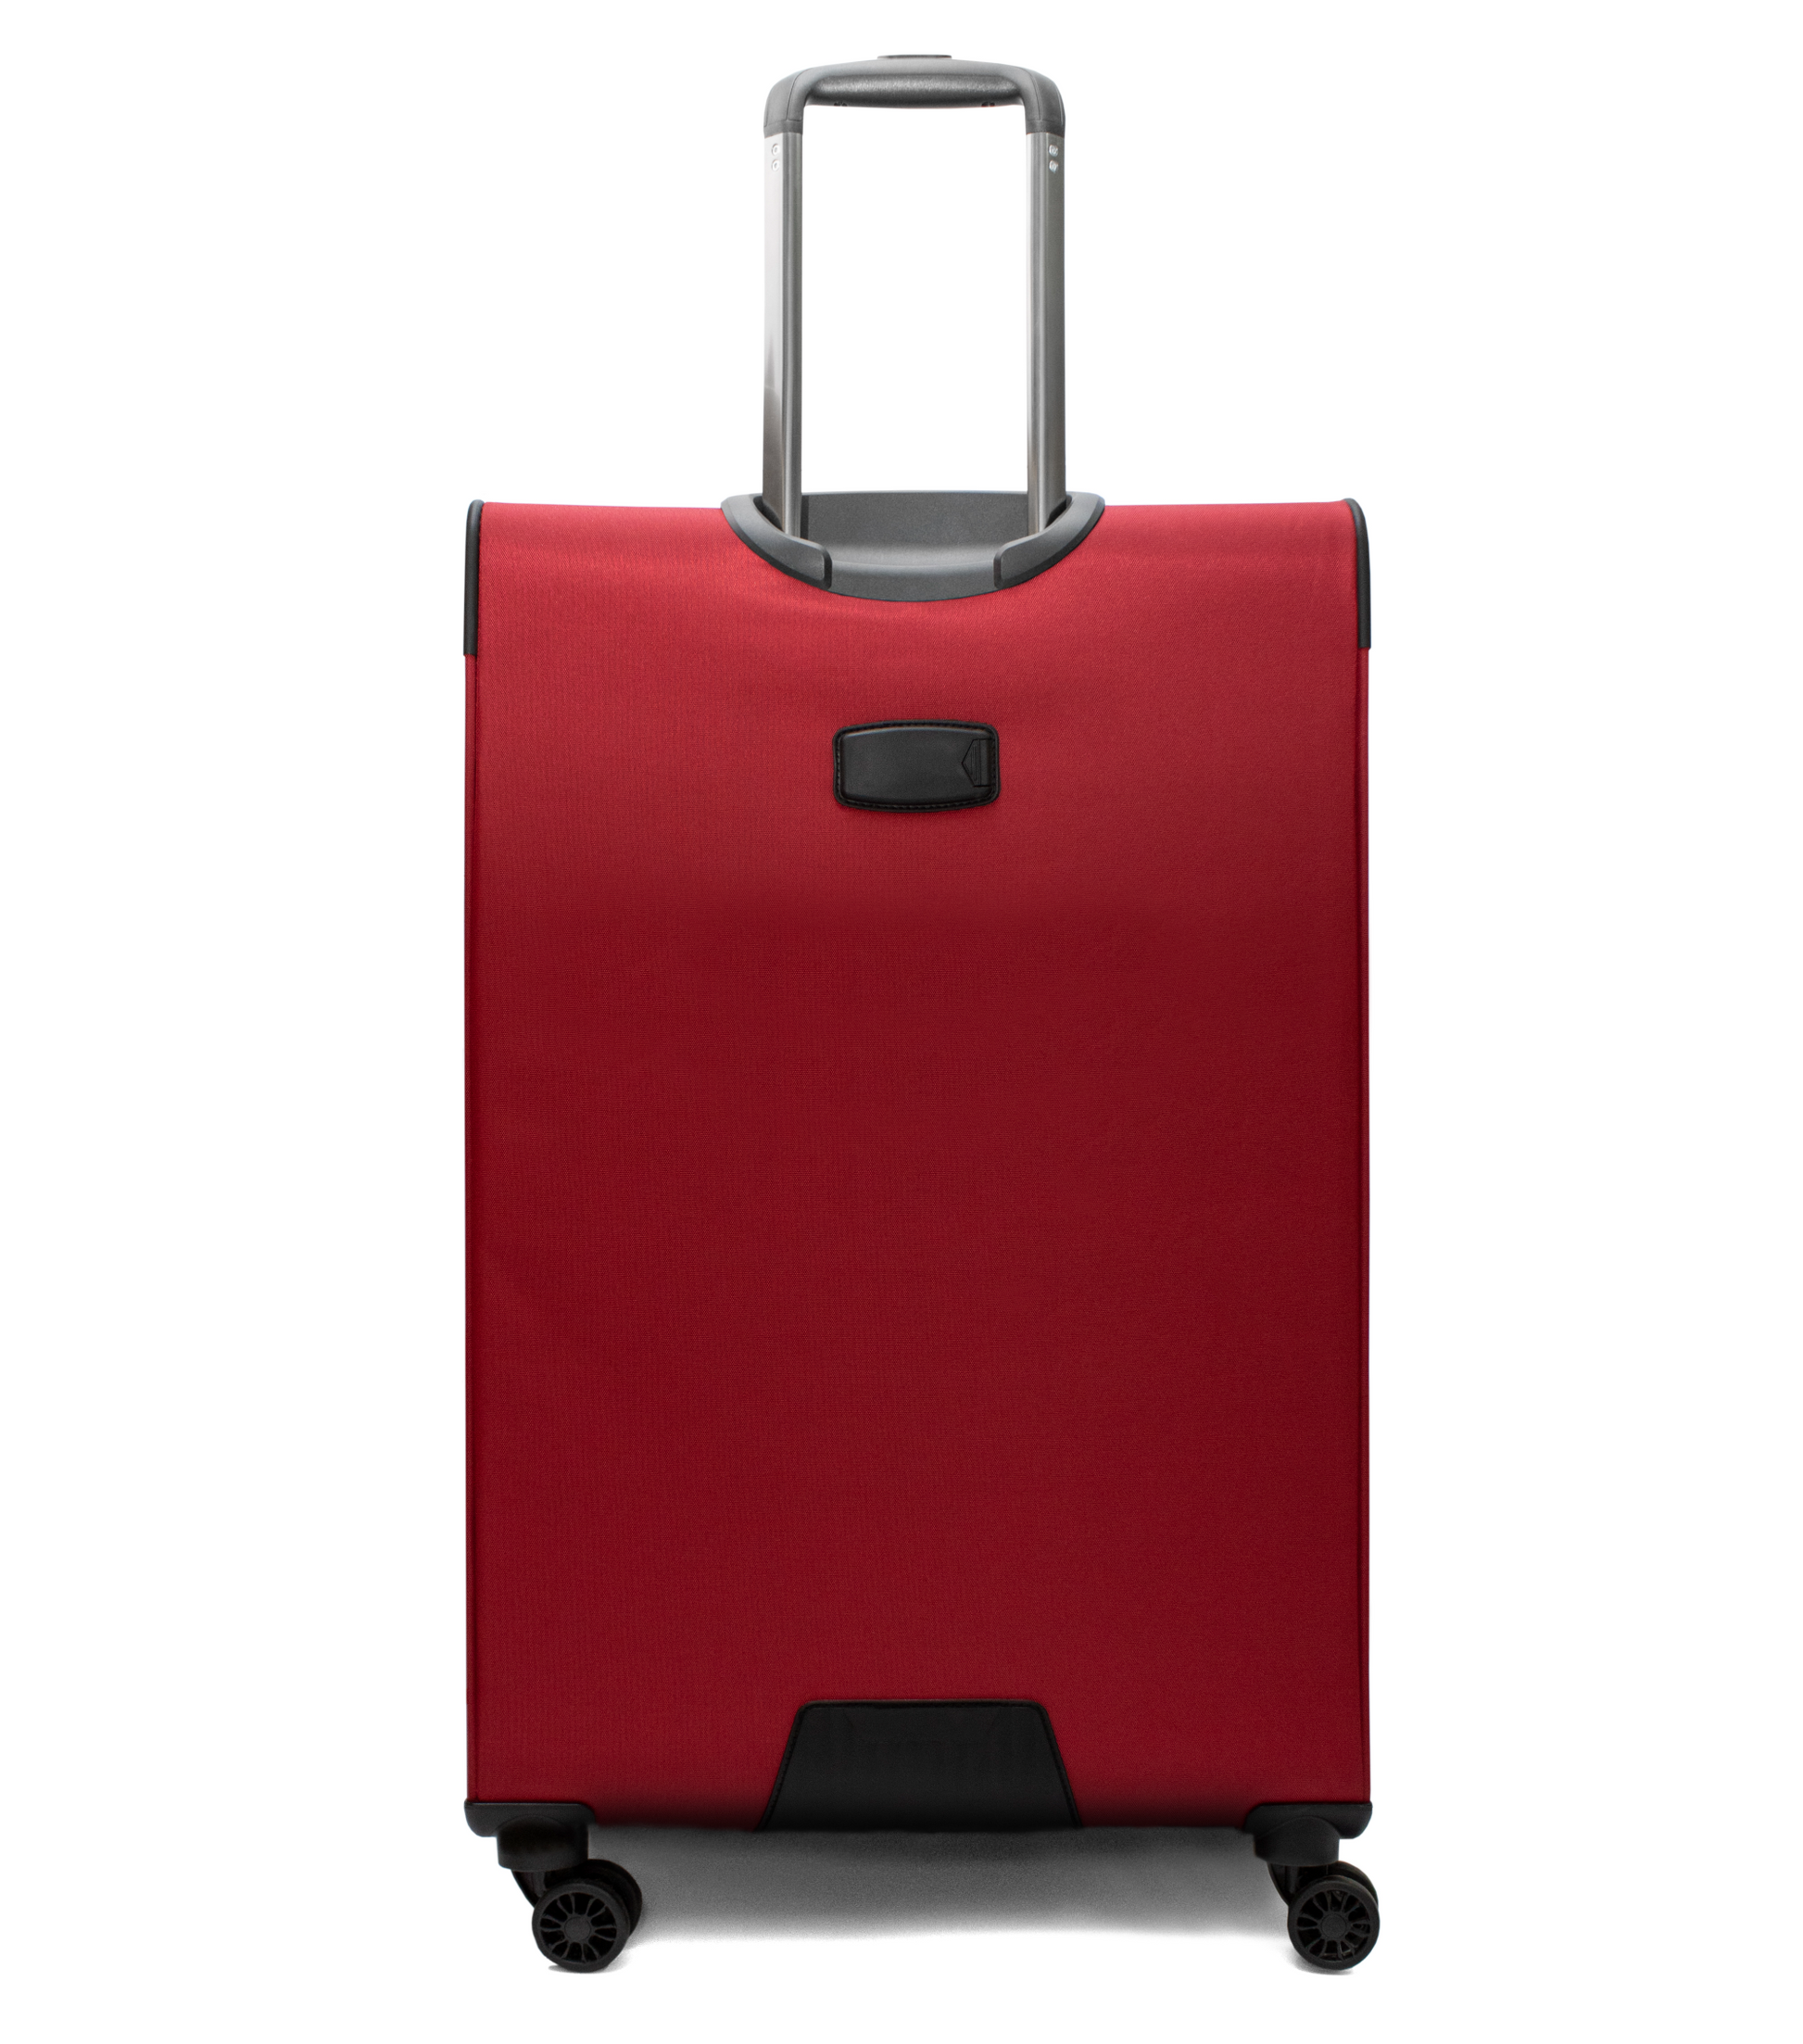 Cavalinho Check-in Softside Luggage (24" or 28") - 28 inch Red - 68020003.04.28_3